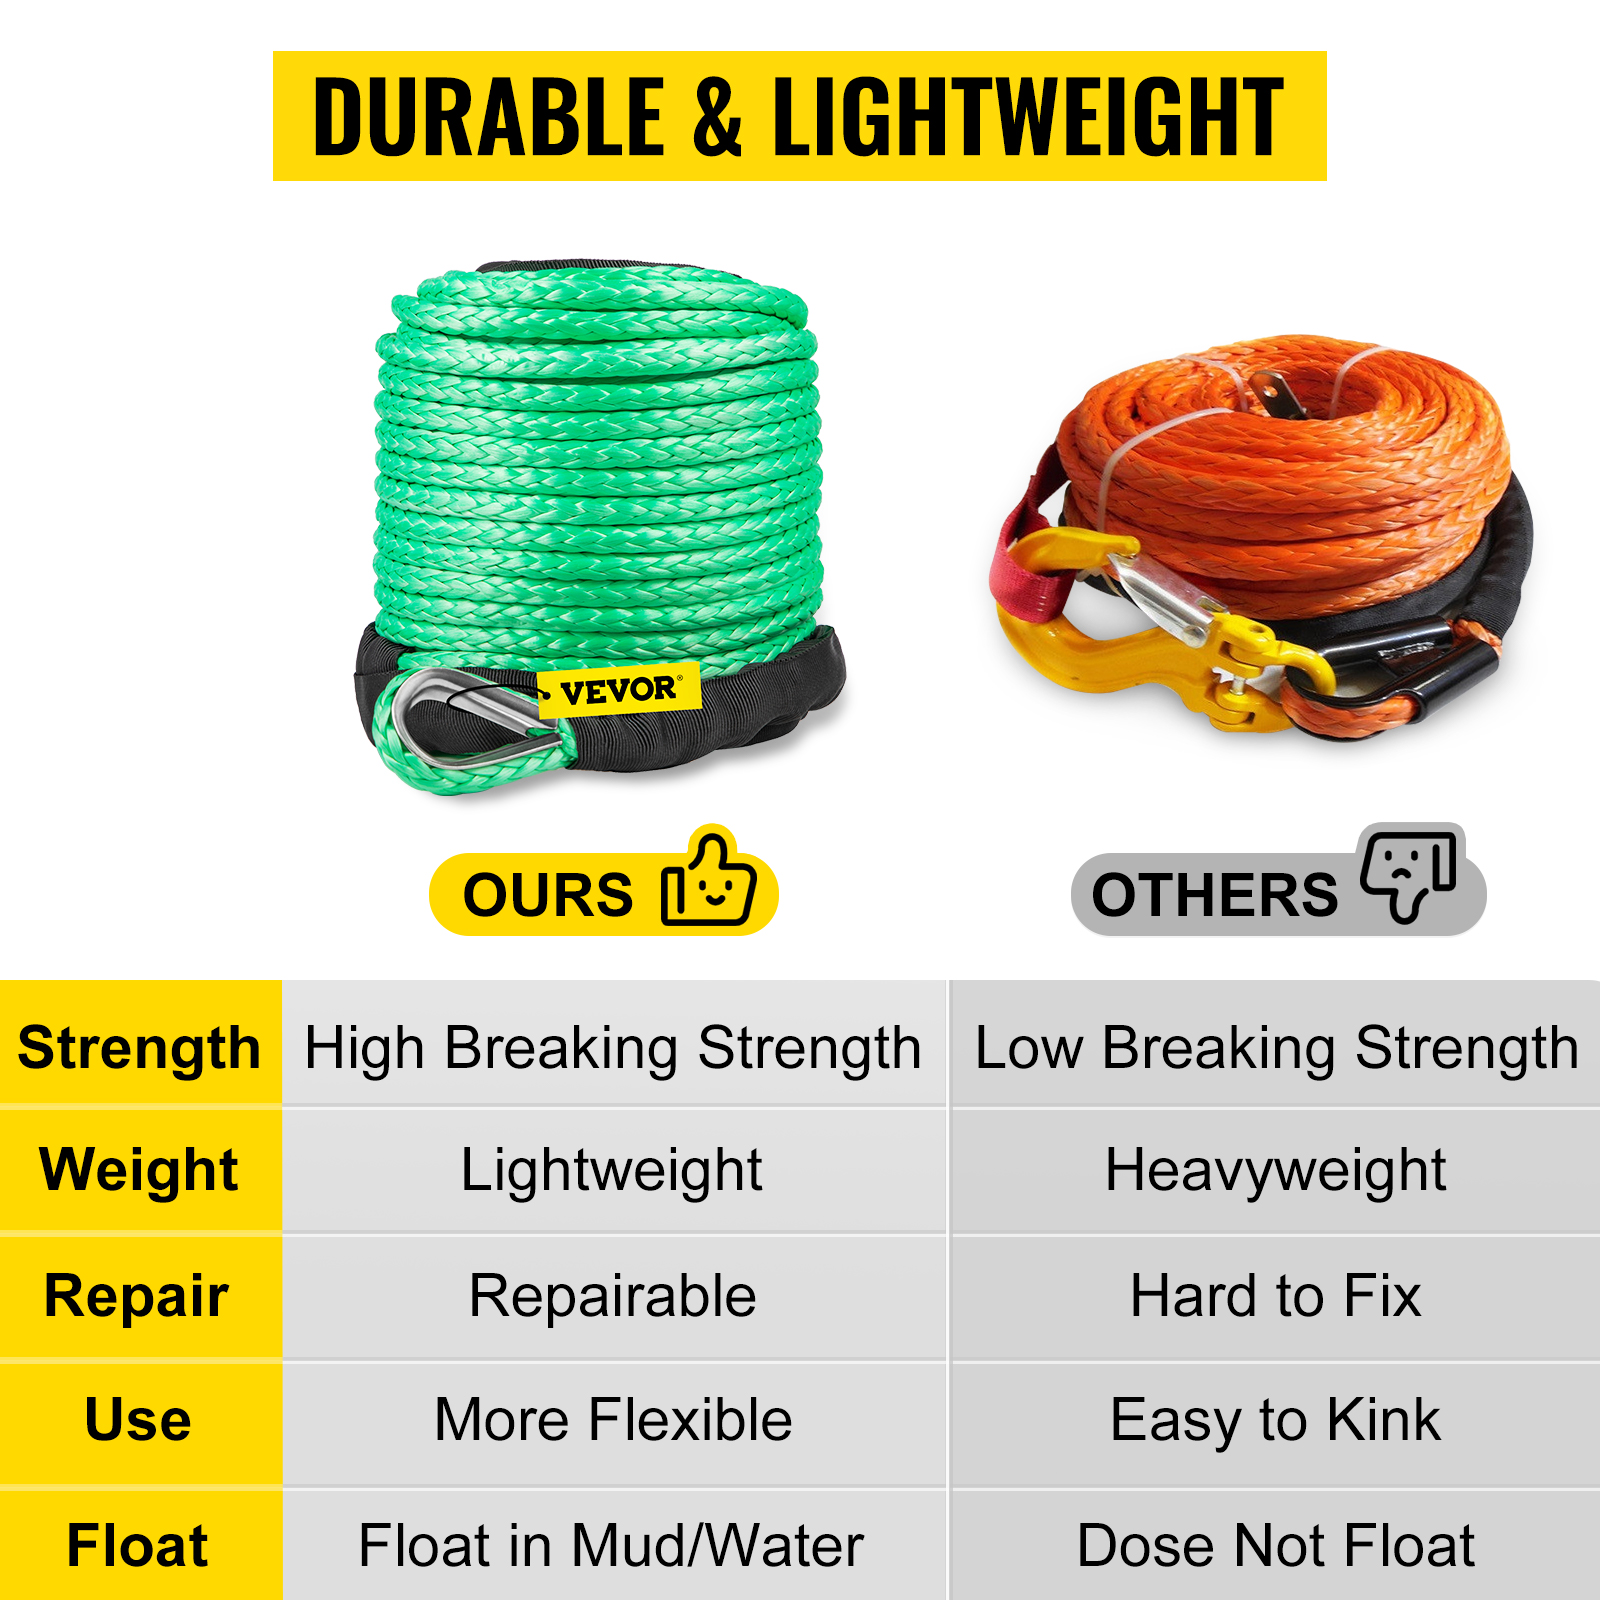 Explore VEVOR's Tough and Reliable Synthetic Winch Ropes